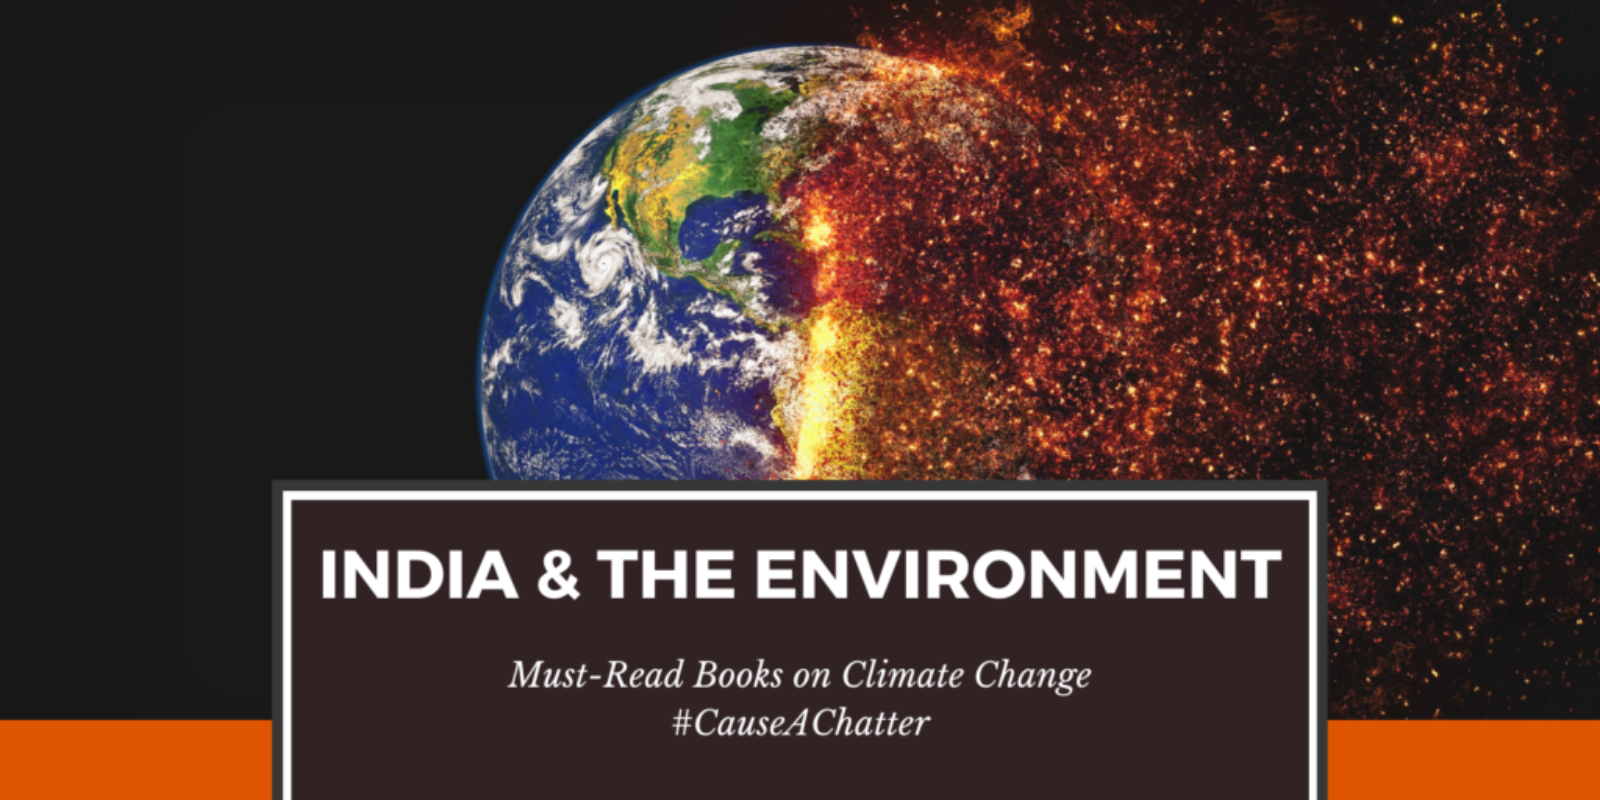 Must-Read Books on Climate Change